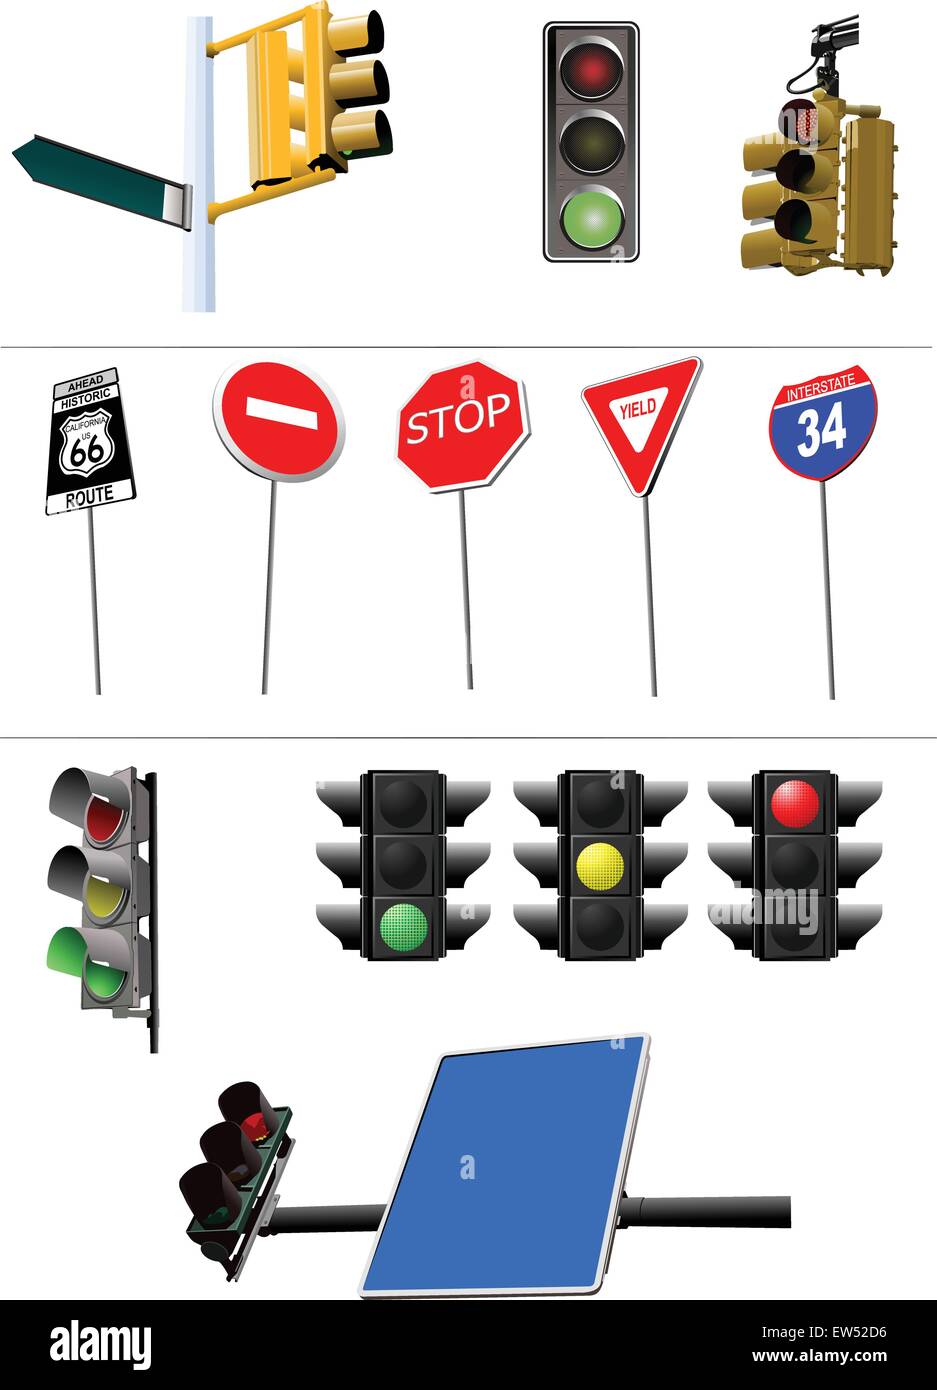 Set of traffic lights. Red signal. Yellow signal. Green signal Stock Vector